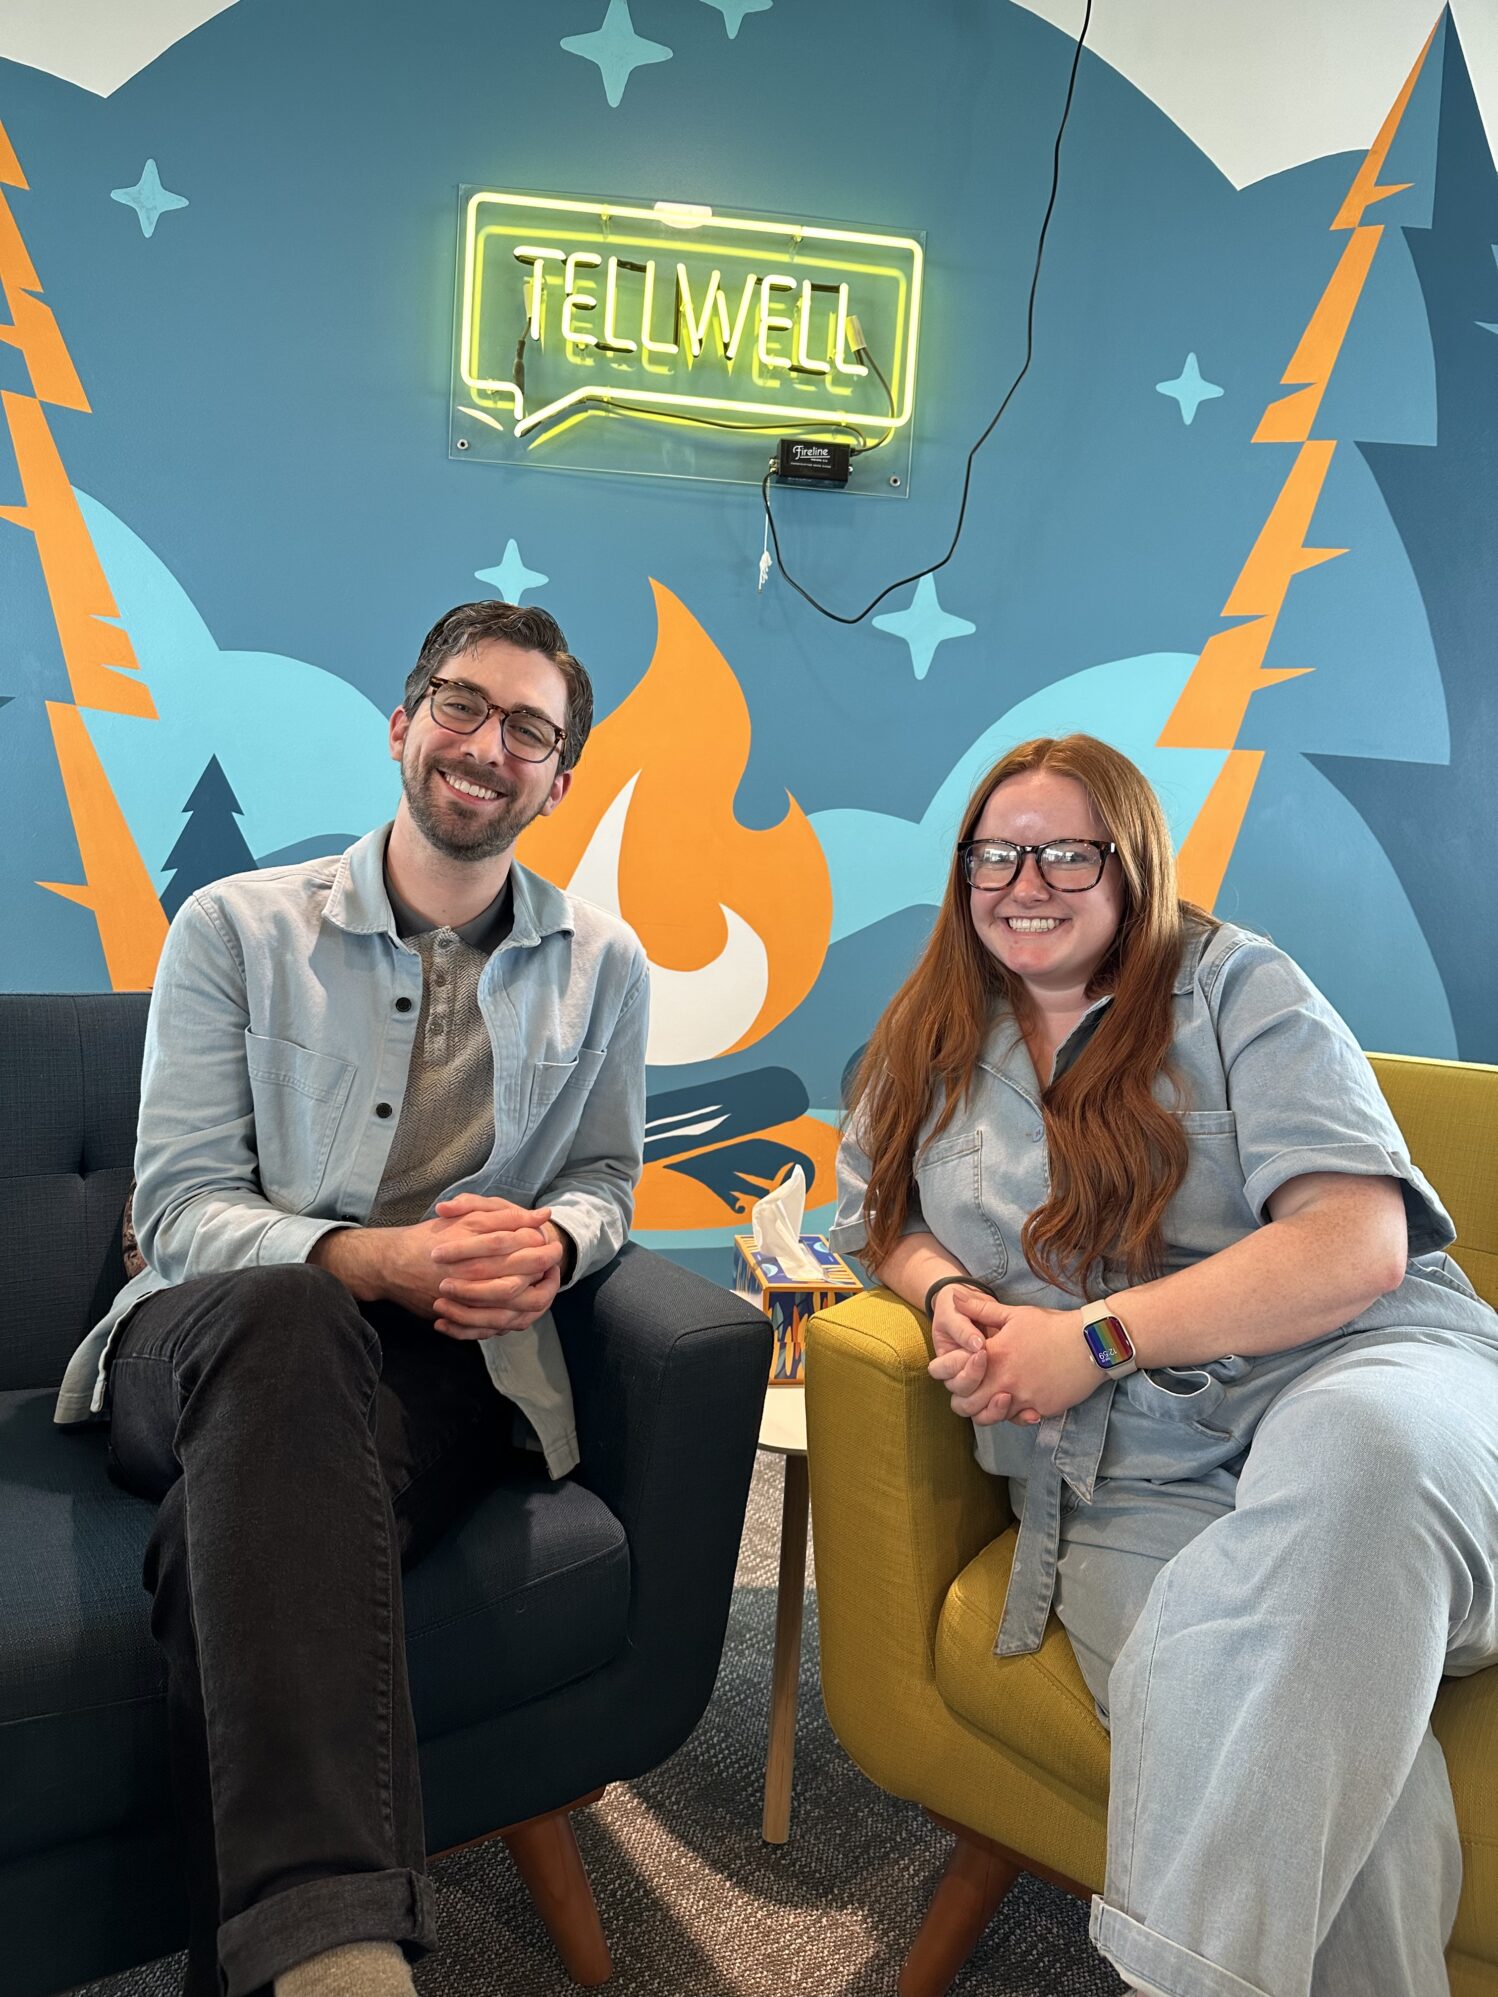 Two smiling individuals–wearing incredibly similar outfits– seated on a couch in a vibrant office environment with a neon 'TELLWELL' sign on the wall, portraying a welcoming and creative workspace.